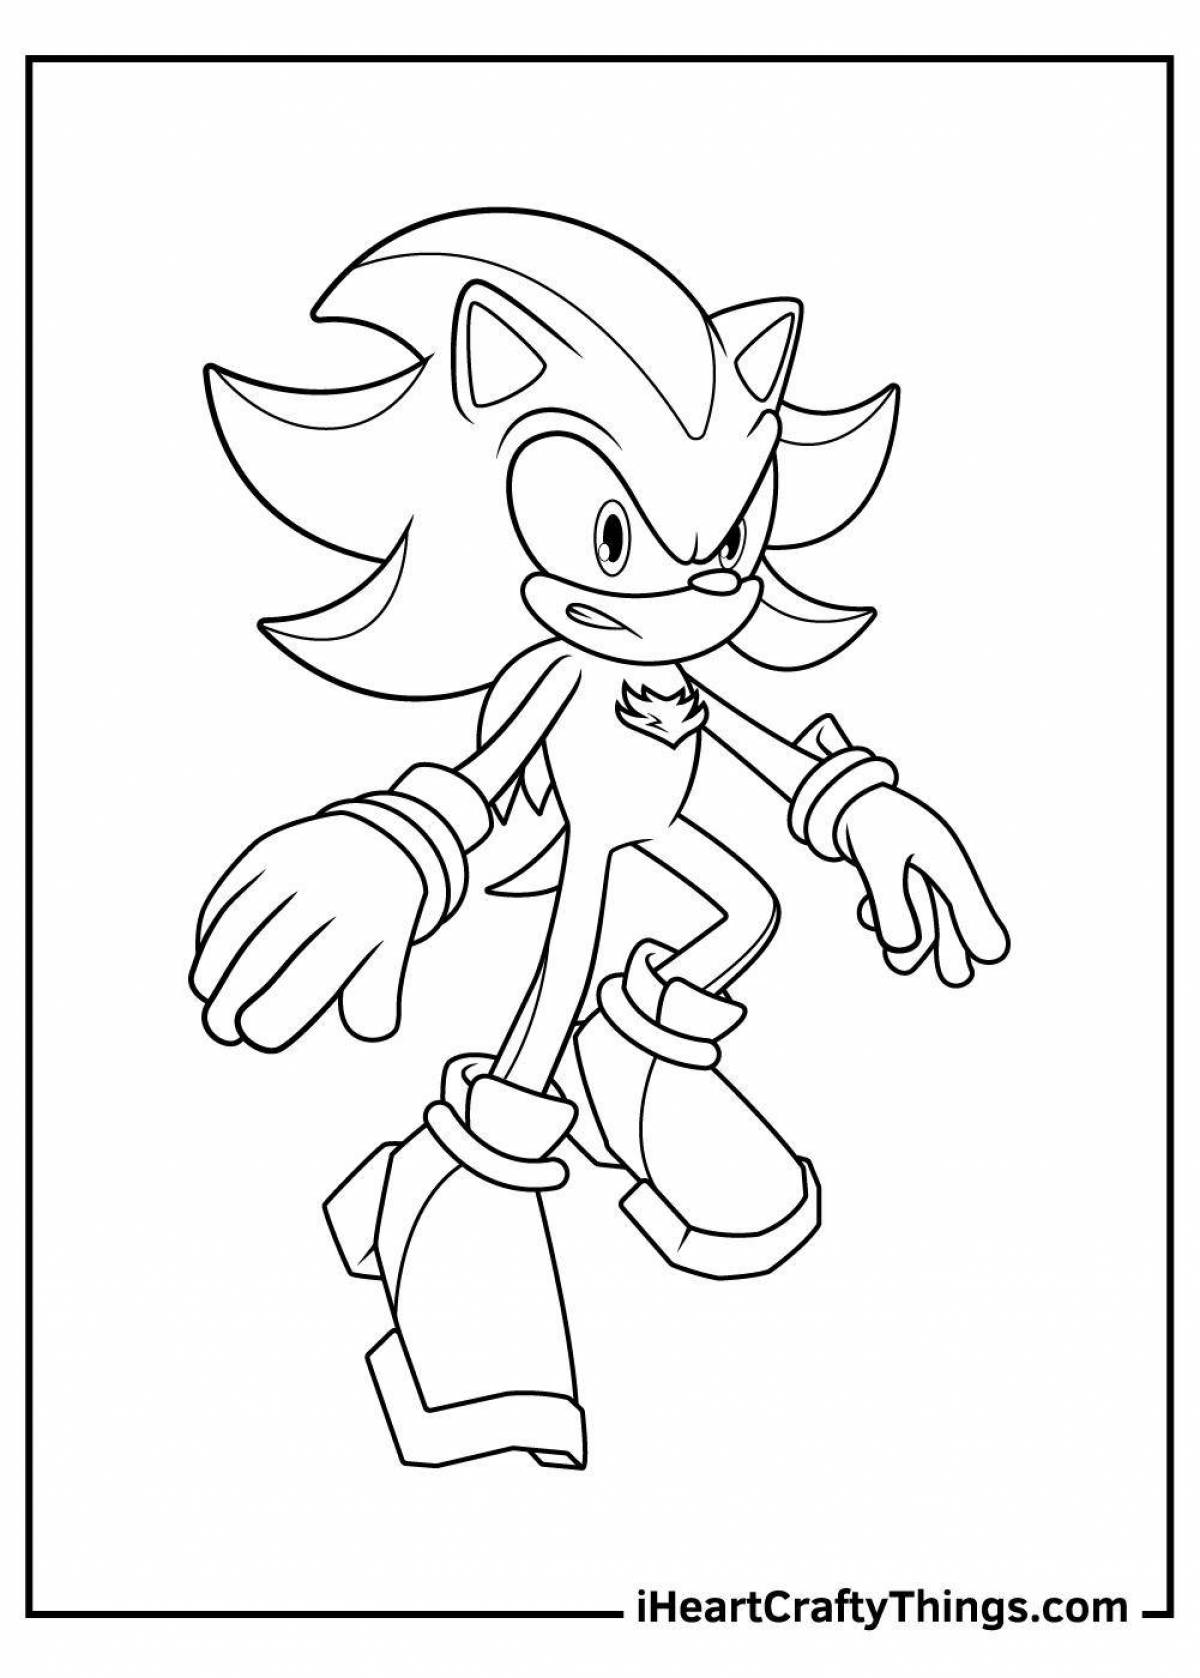 Sonic live coloring